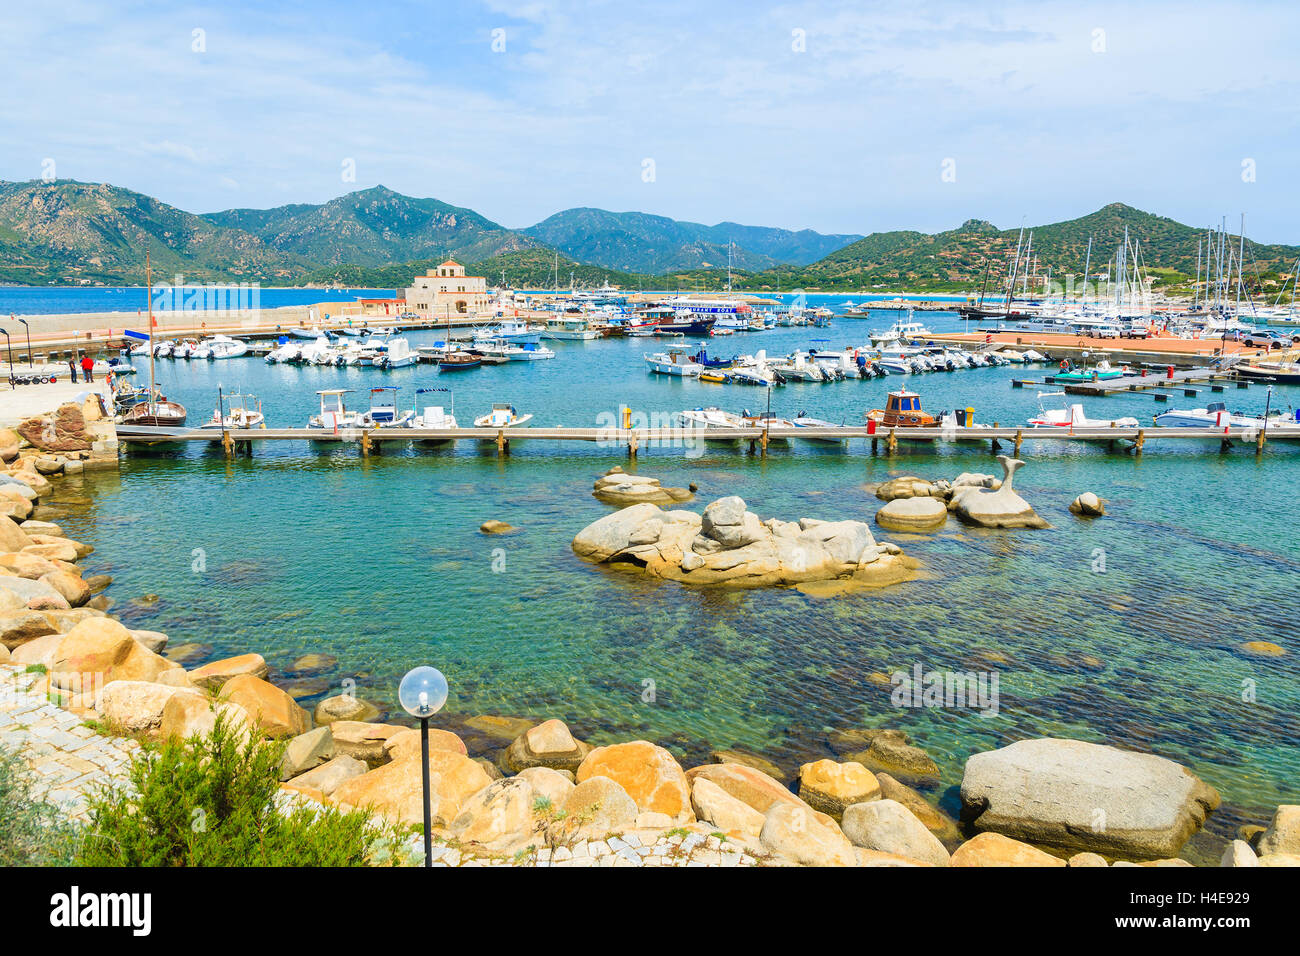 View of Porto Giunco touristic harbour with sailboats and yachts mooring, Sardinia island, Italy Stock Photo